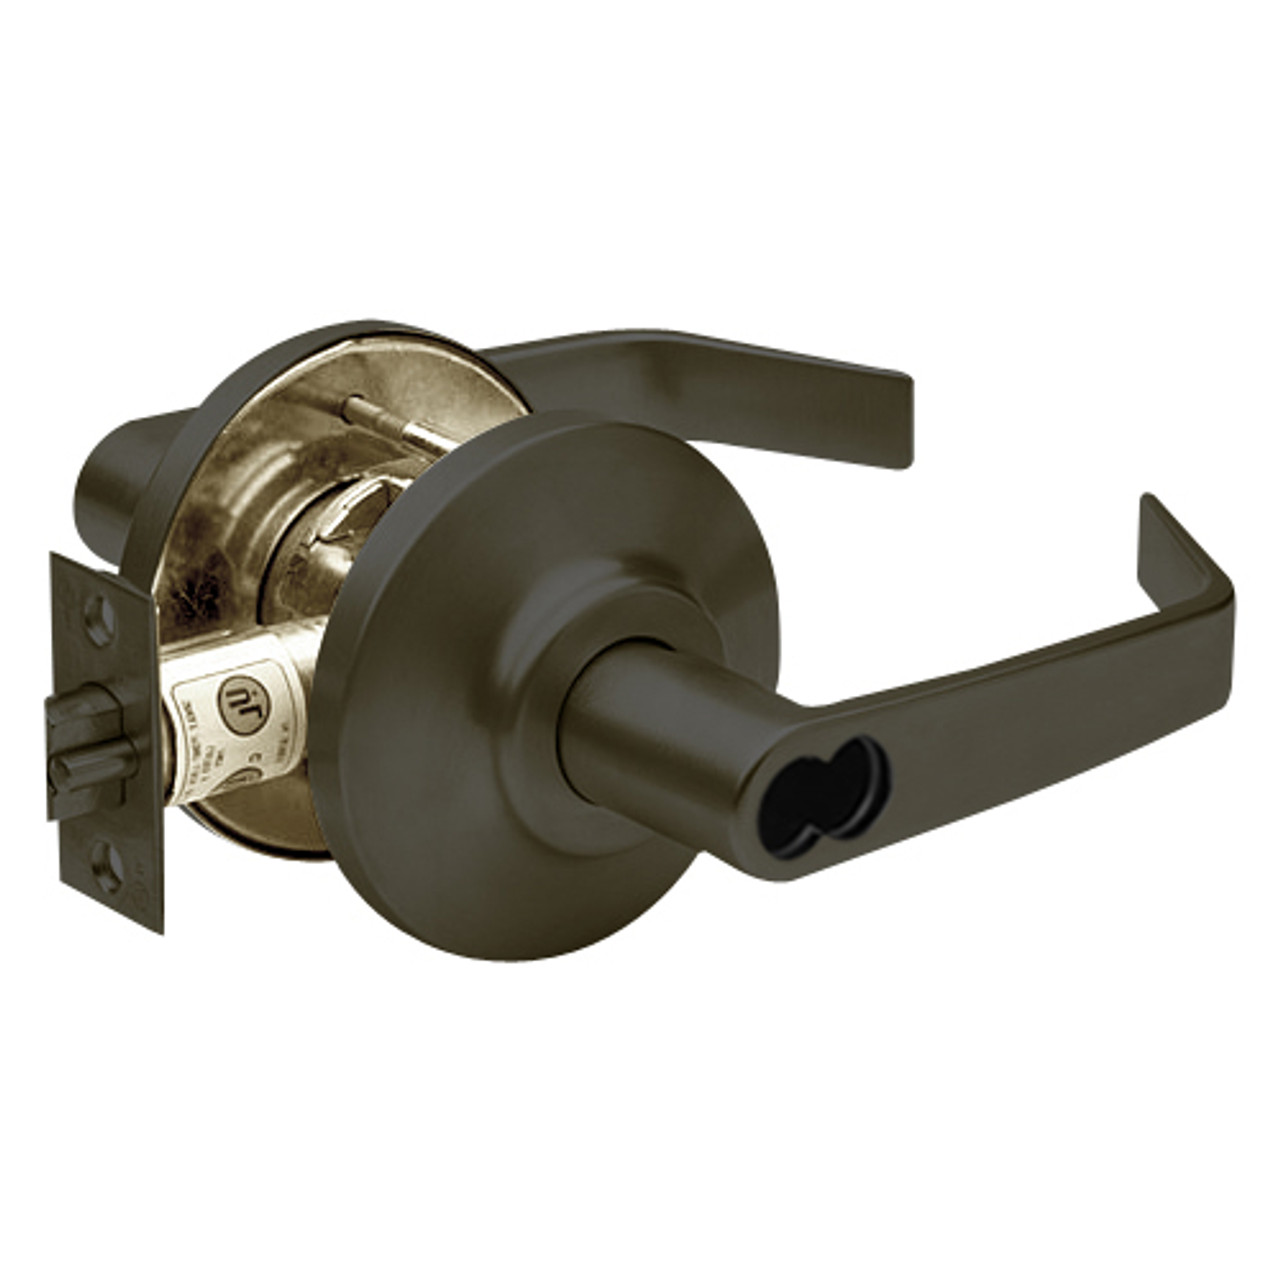 7KC37R15DSTK613 Best 7KC Series Classroom Medium Duty Cylindrical Lever Locks with Contour Angle Return Design in Oil Rubbed Bronze